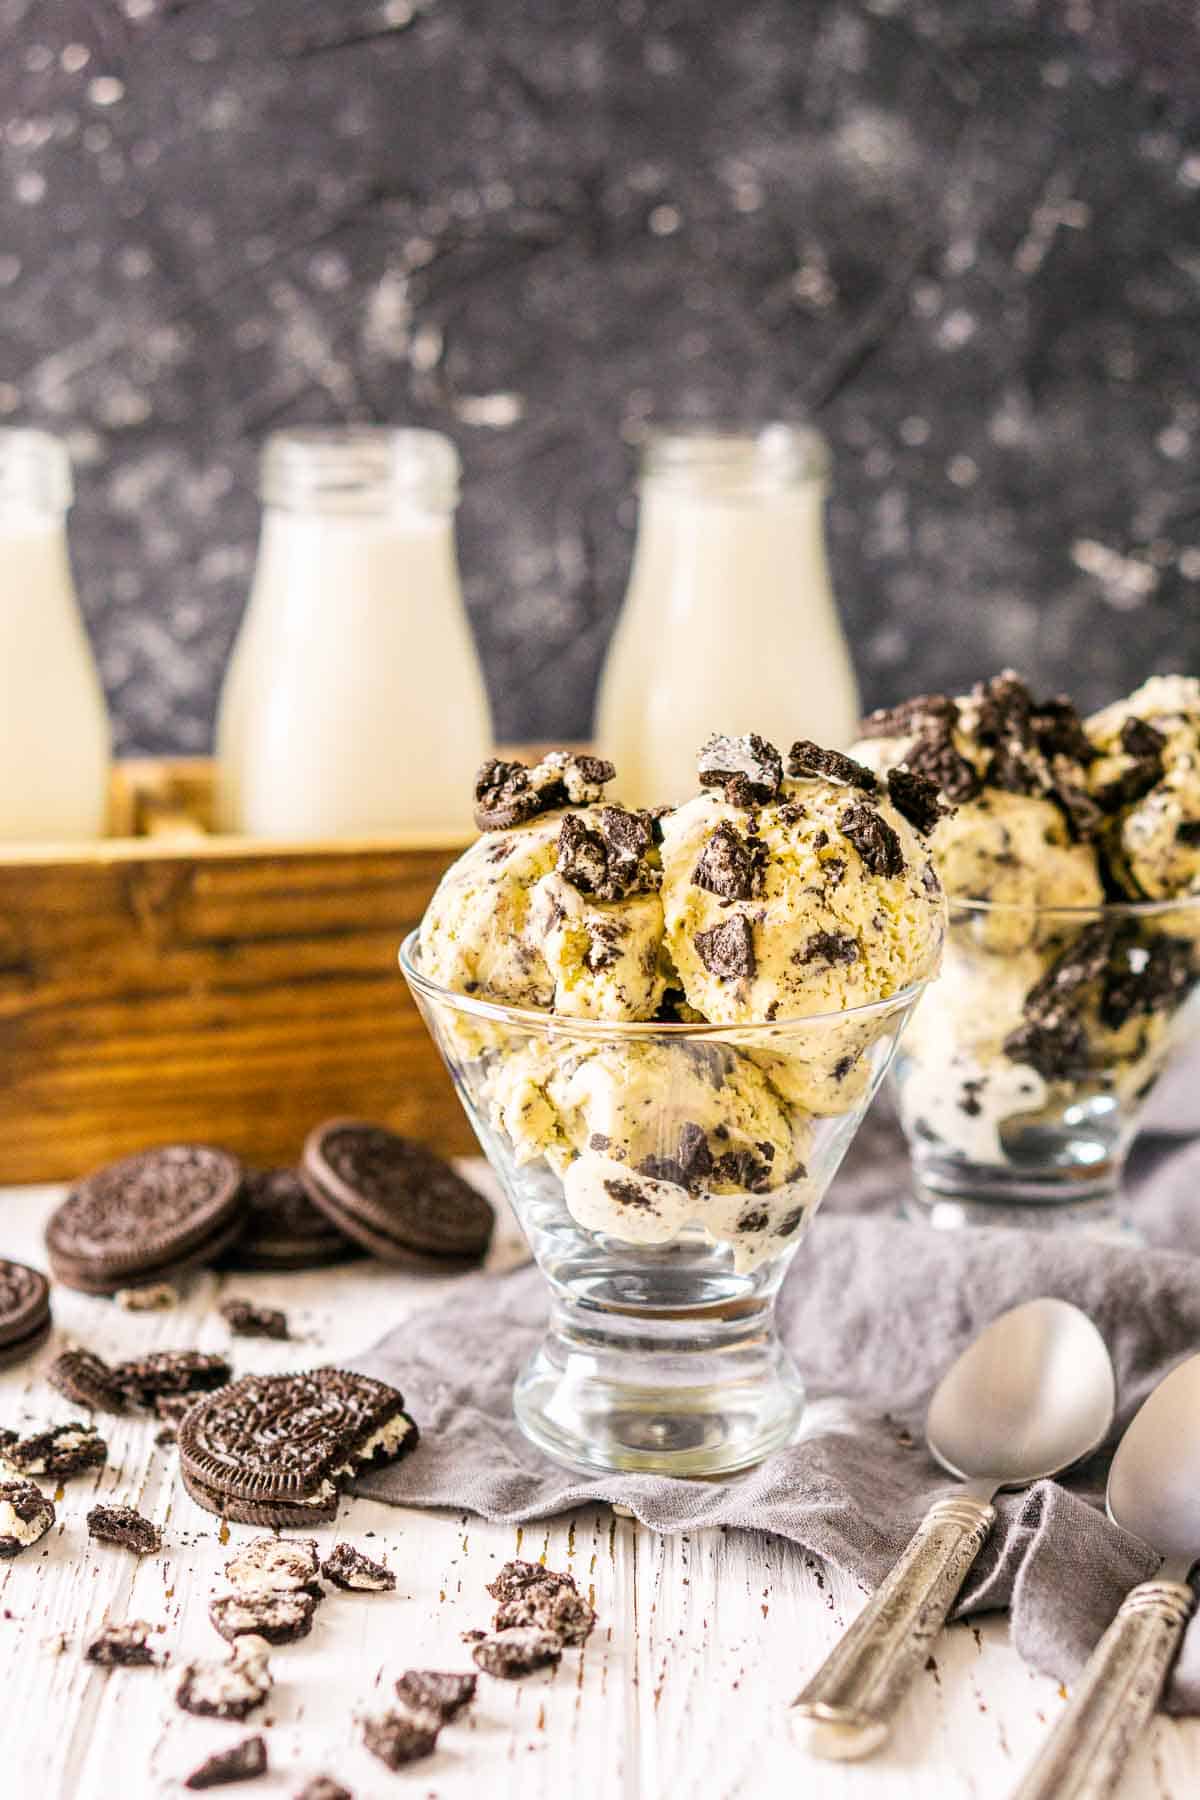 A glass cup of the Oreo ice cream on a white wooden board with silver spoons to the right and crushed cookies to the left.